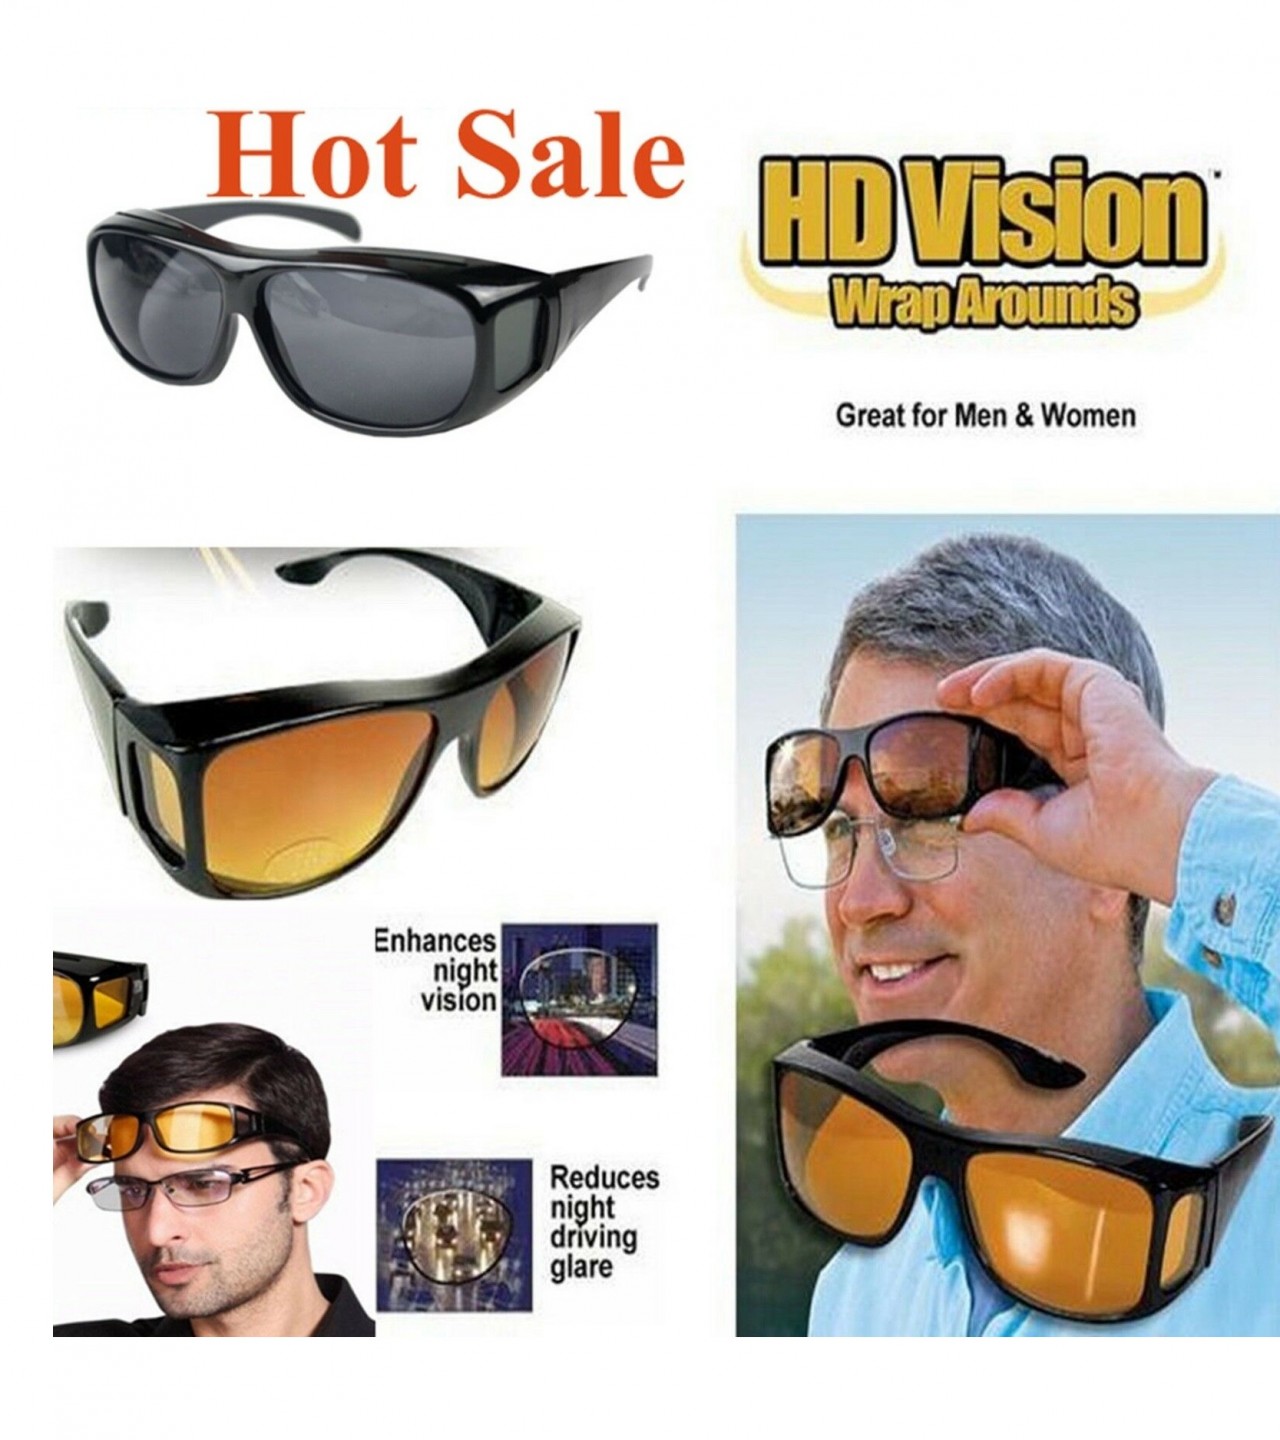 Night & Day Hd Vision Glasses - Cycling Riding Driving & Sports Glasses - Black & Yellow